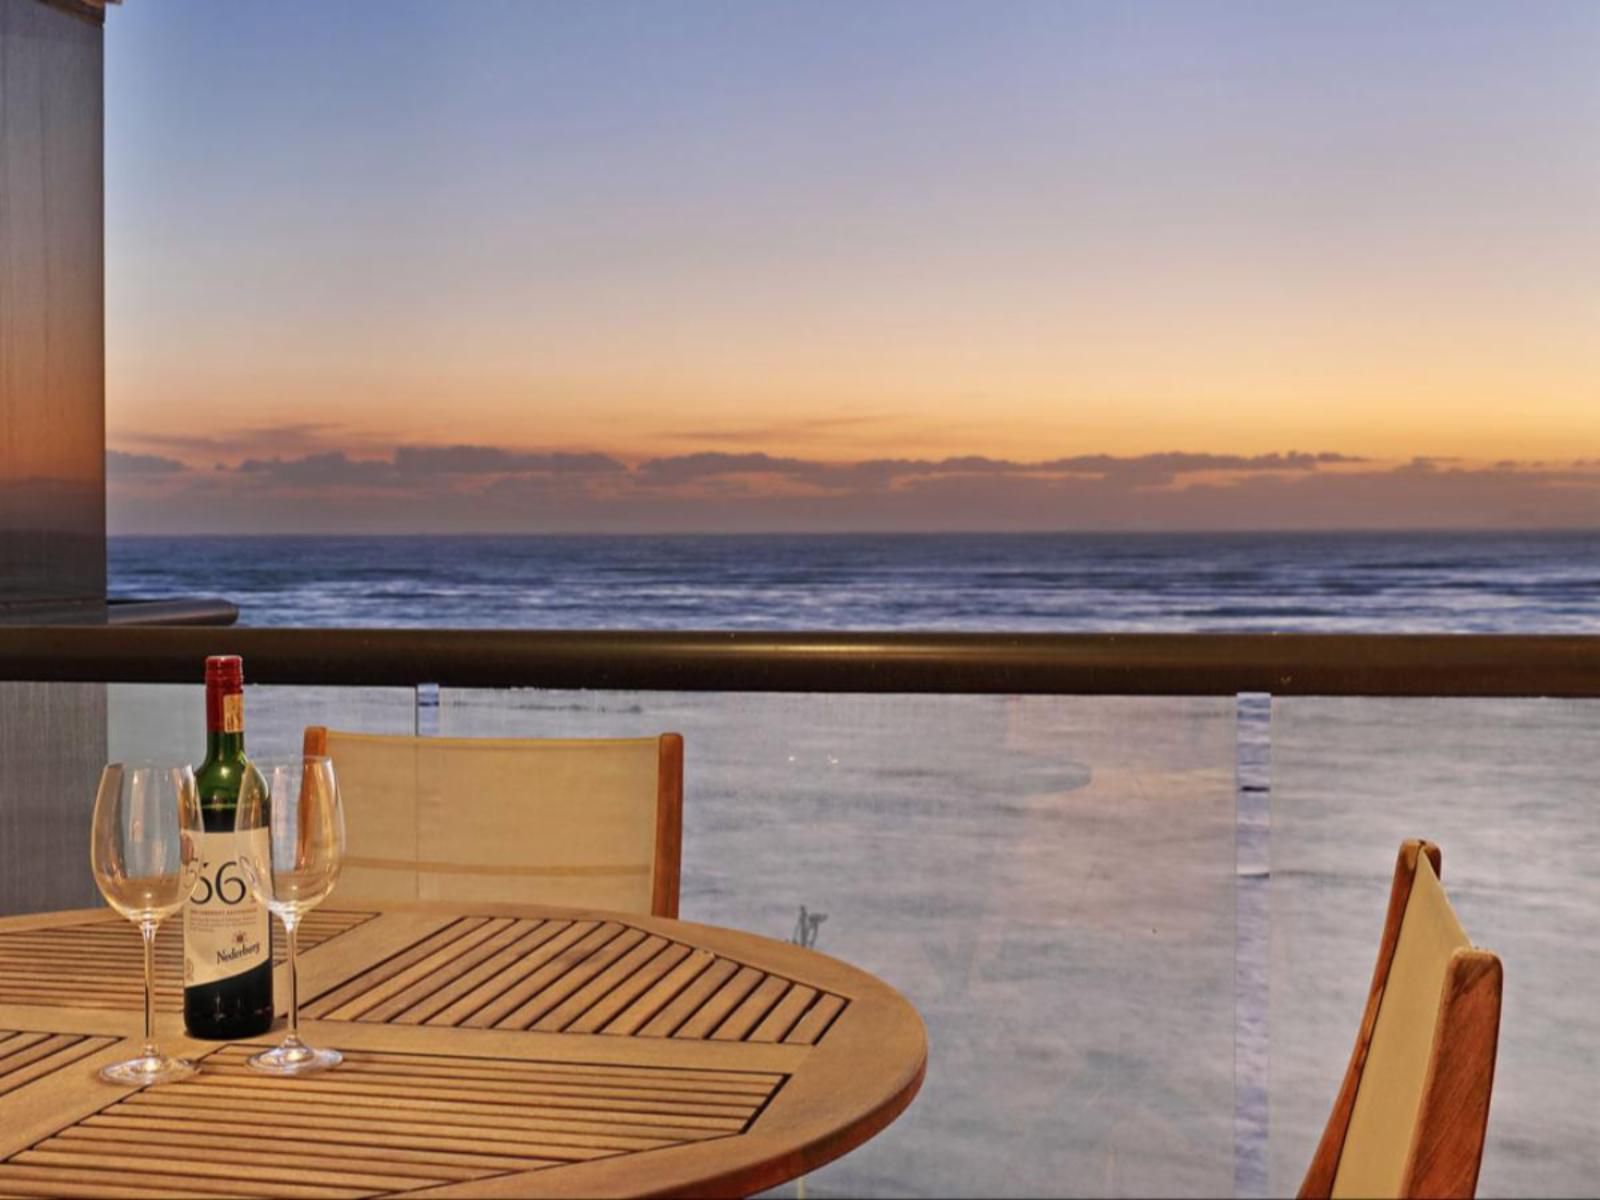 304 Ocean View By Hostagents Van Ryneveld Strand Strand Western Cape South Africa Beach, Nature, Sand, Drink